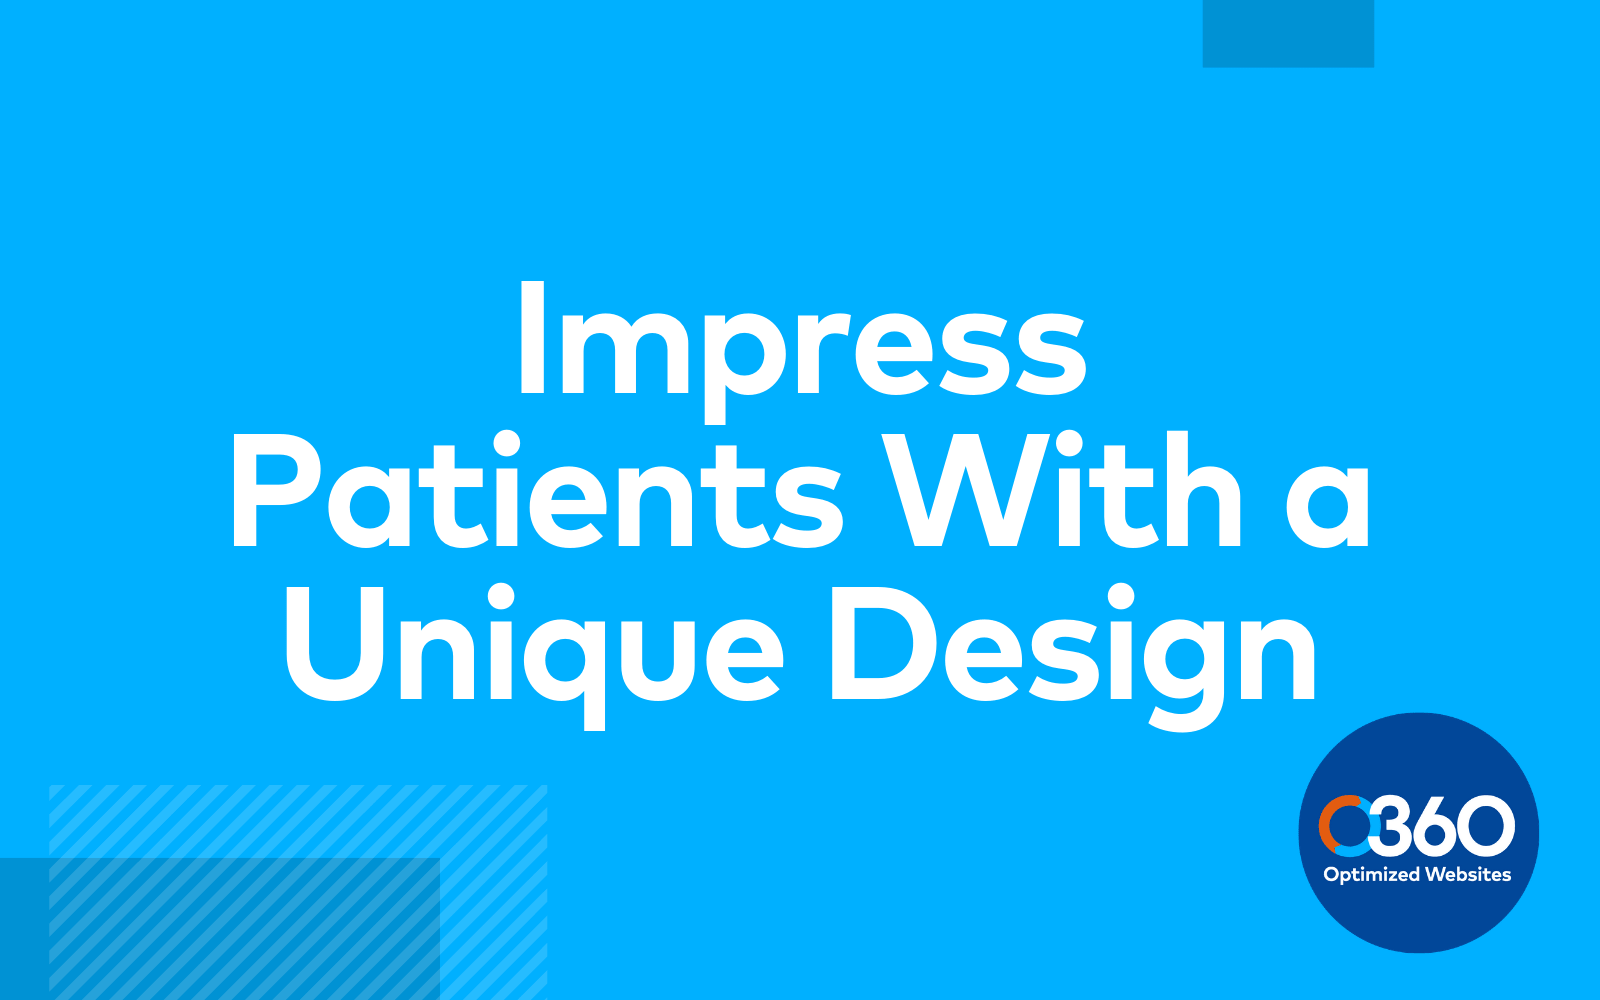 impress patients with a new design